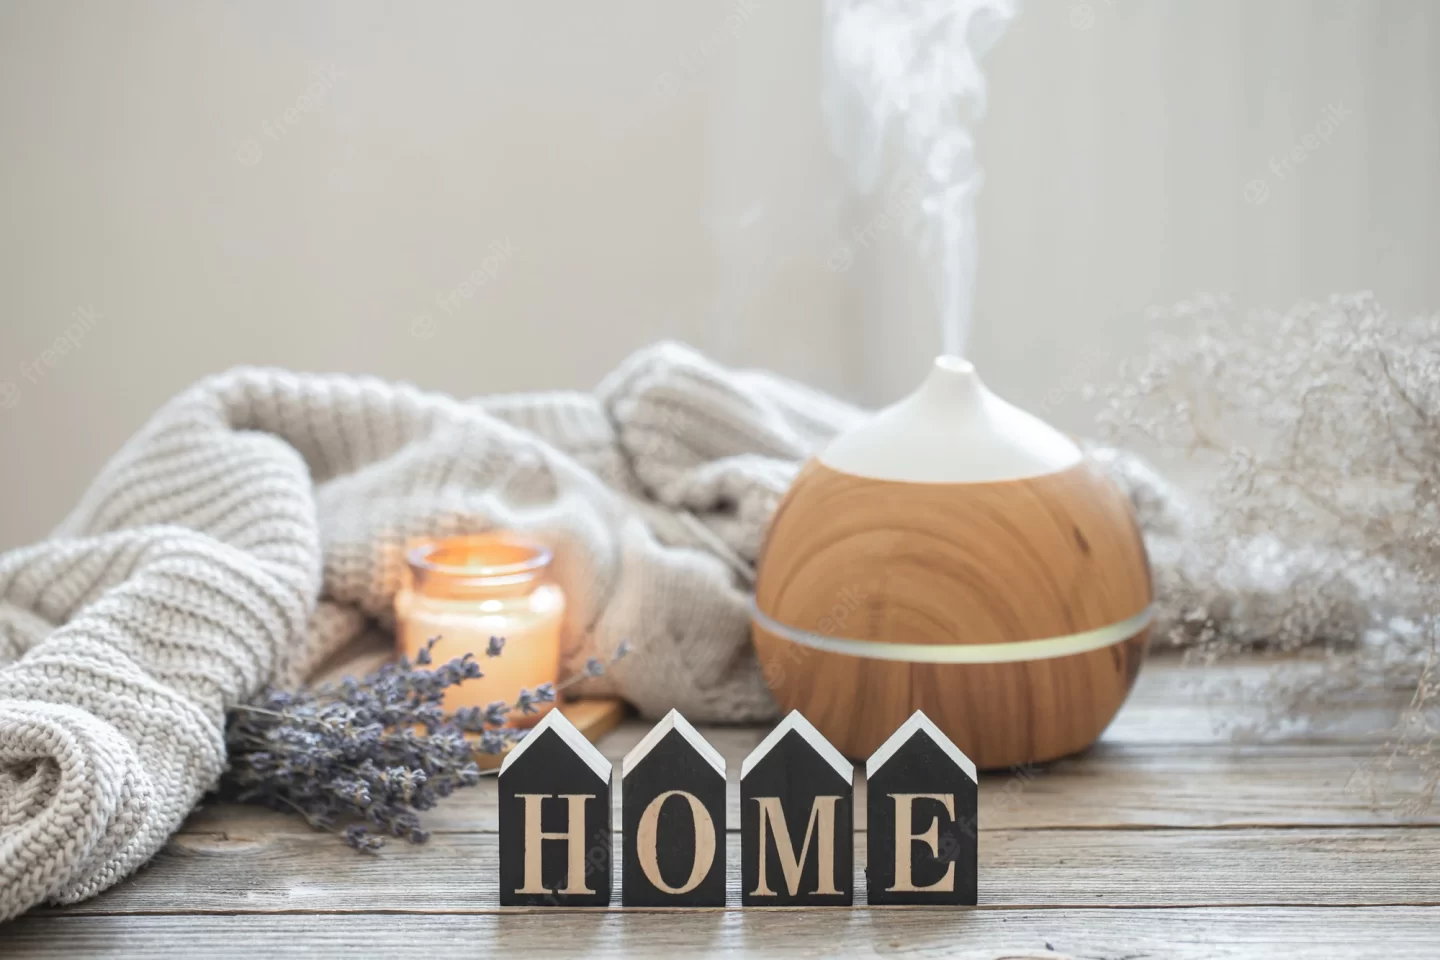 Winter self-care ideas to add to your routine - use a humidifier